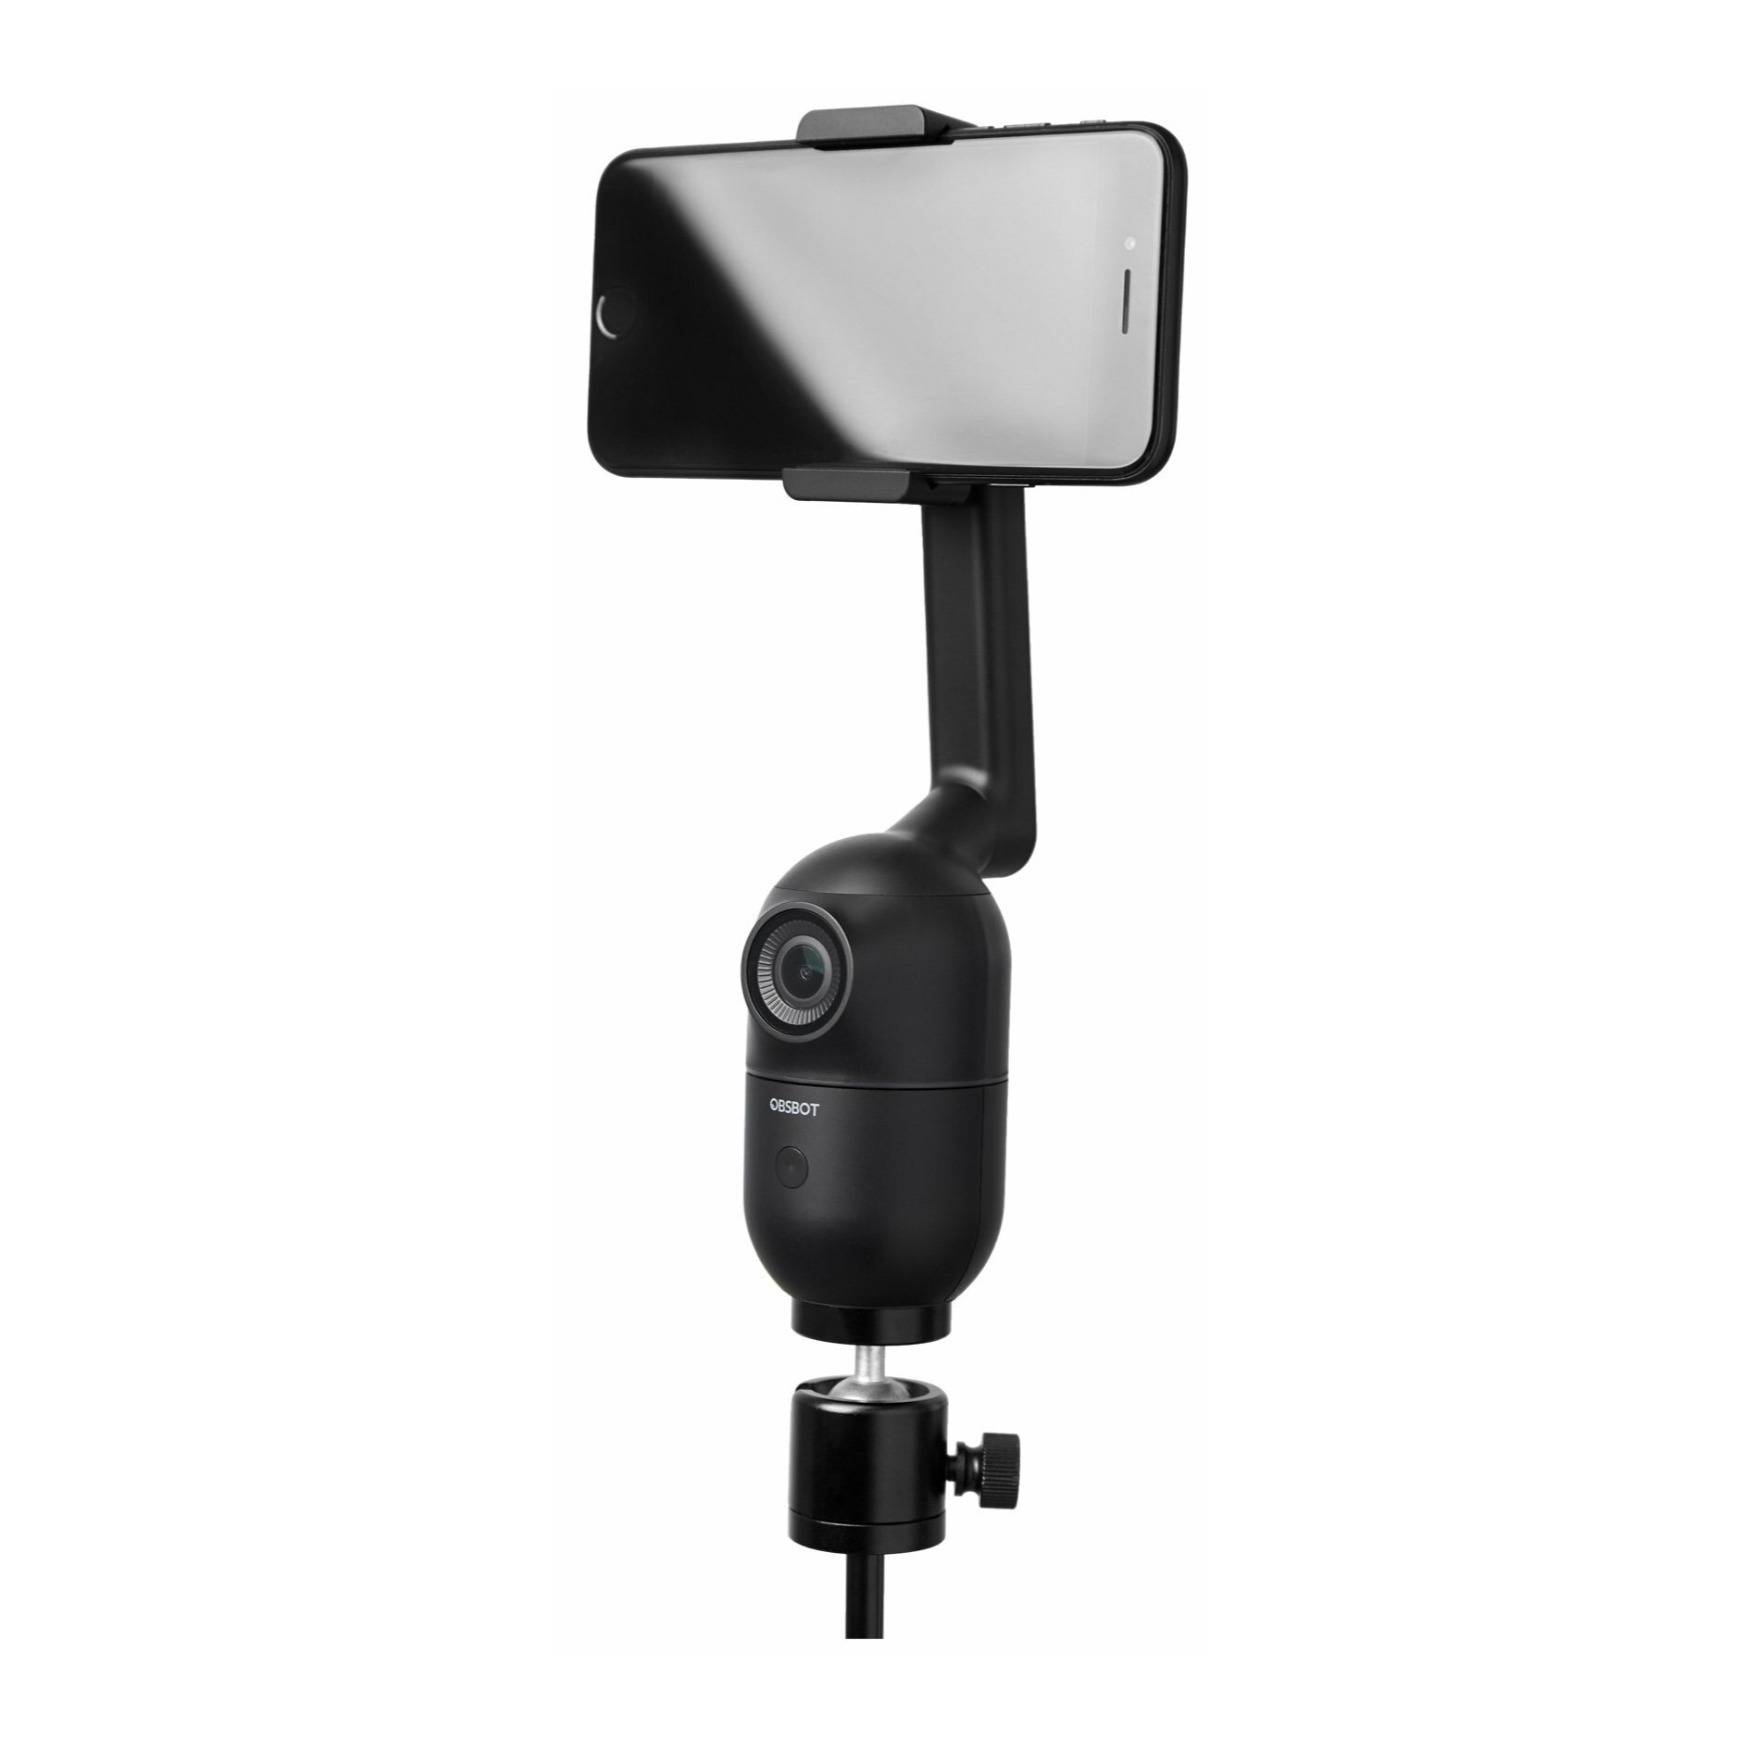 OBSBOT Me AI-Powered Phone Mount, Auto-Tracking Phone Mount with Wide-Angle Sensing Camera